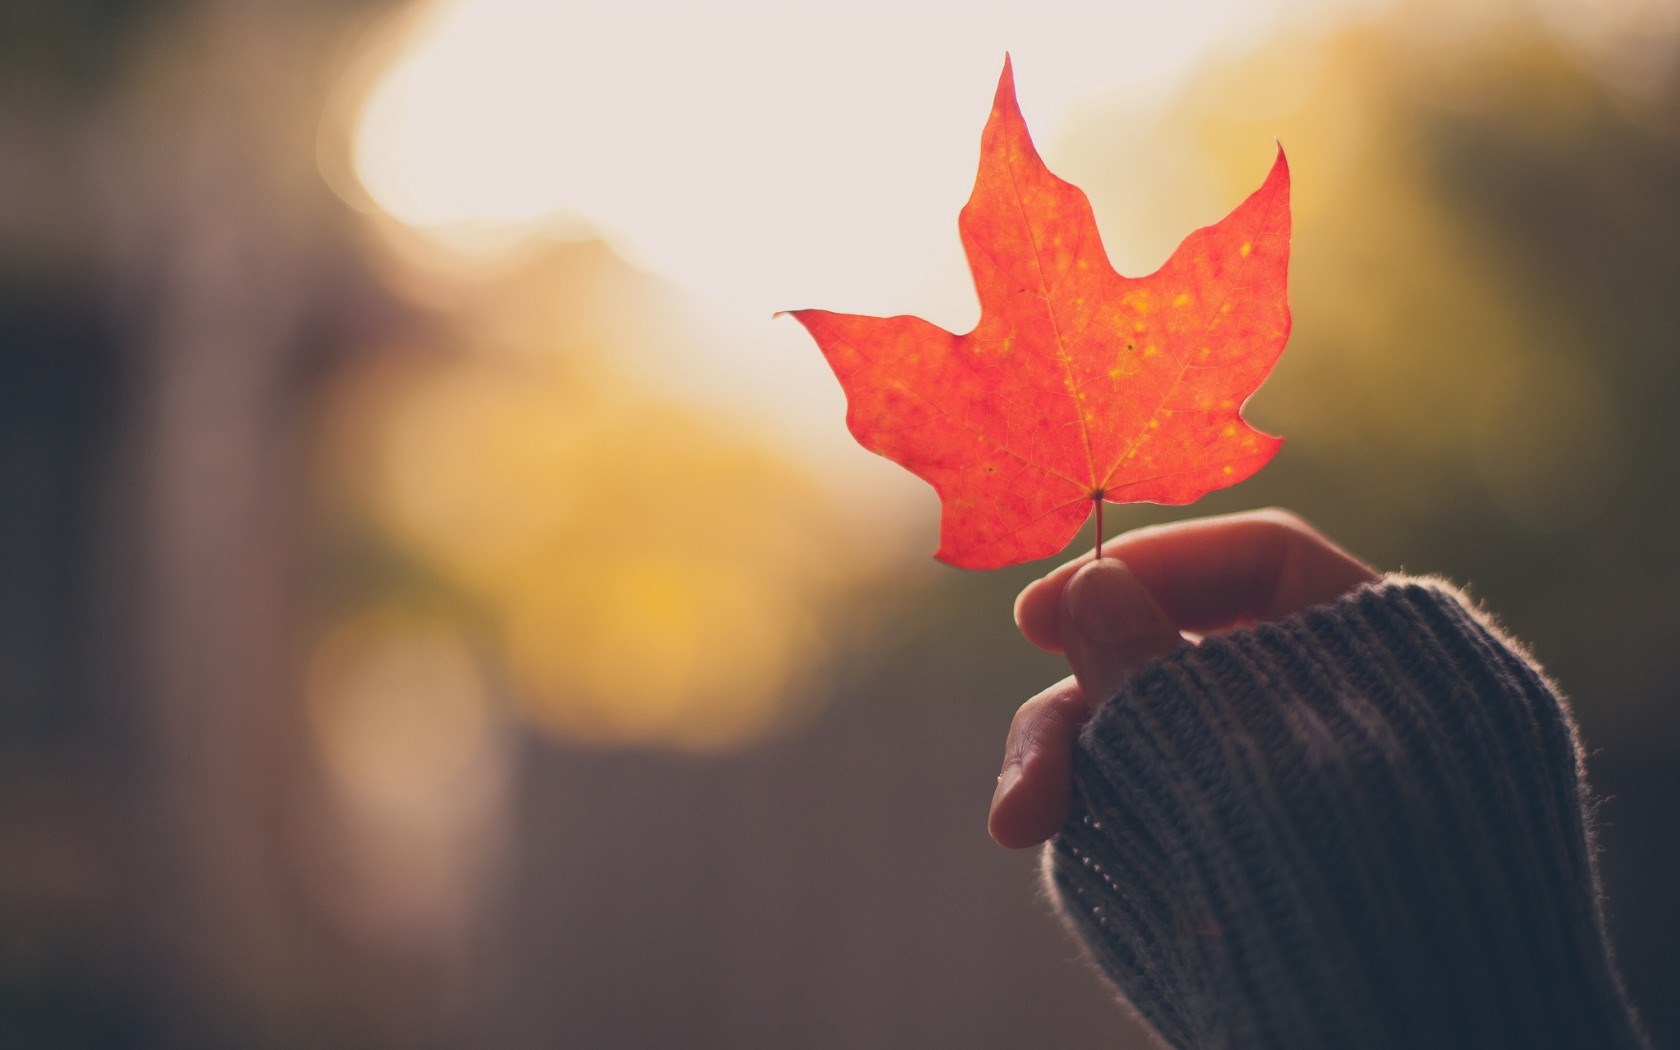 girl-hand-holding-an-autumn-red-maple-leaf